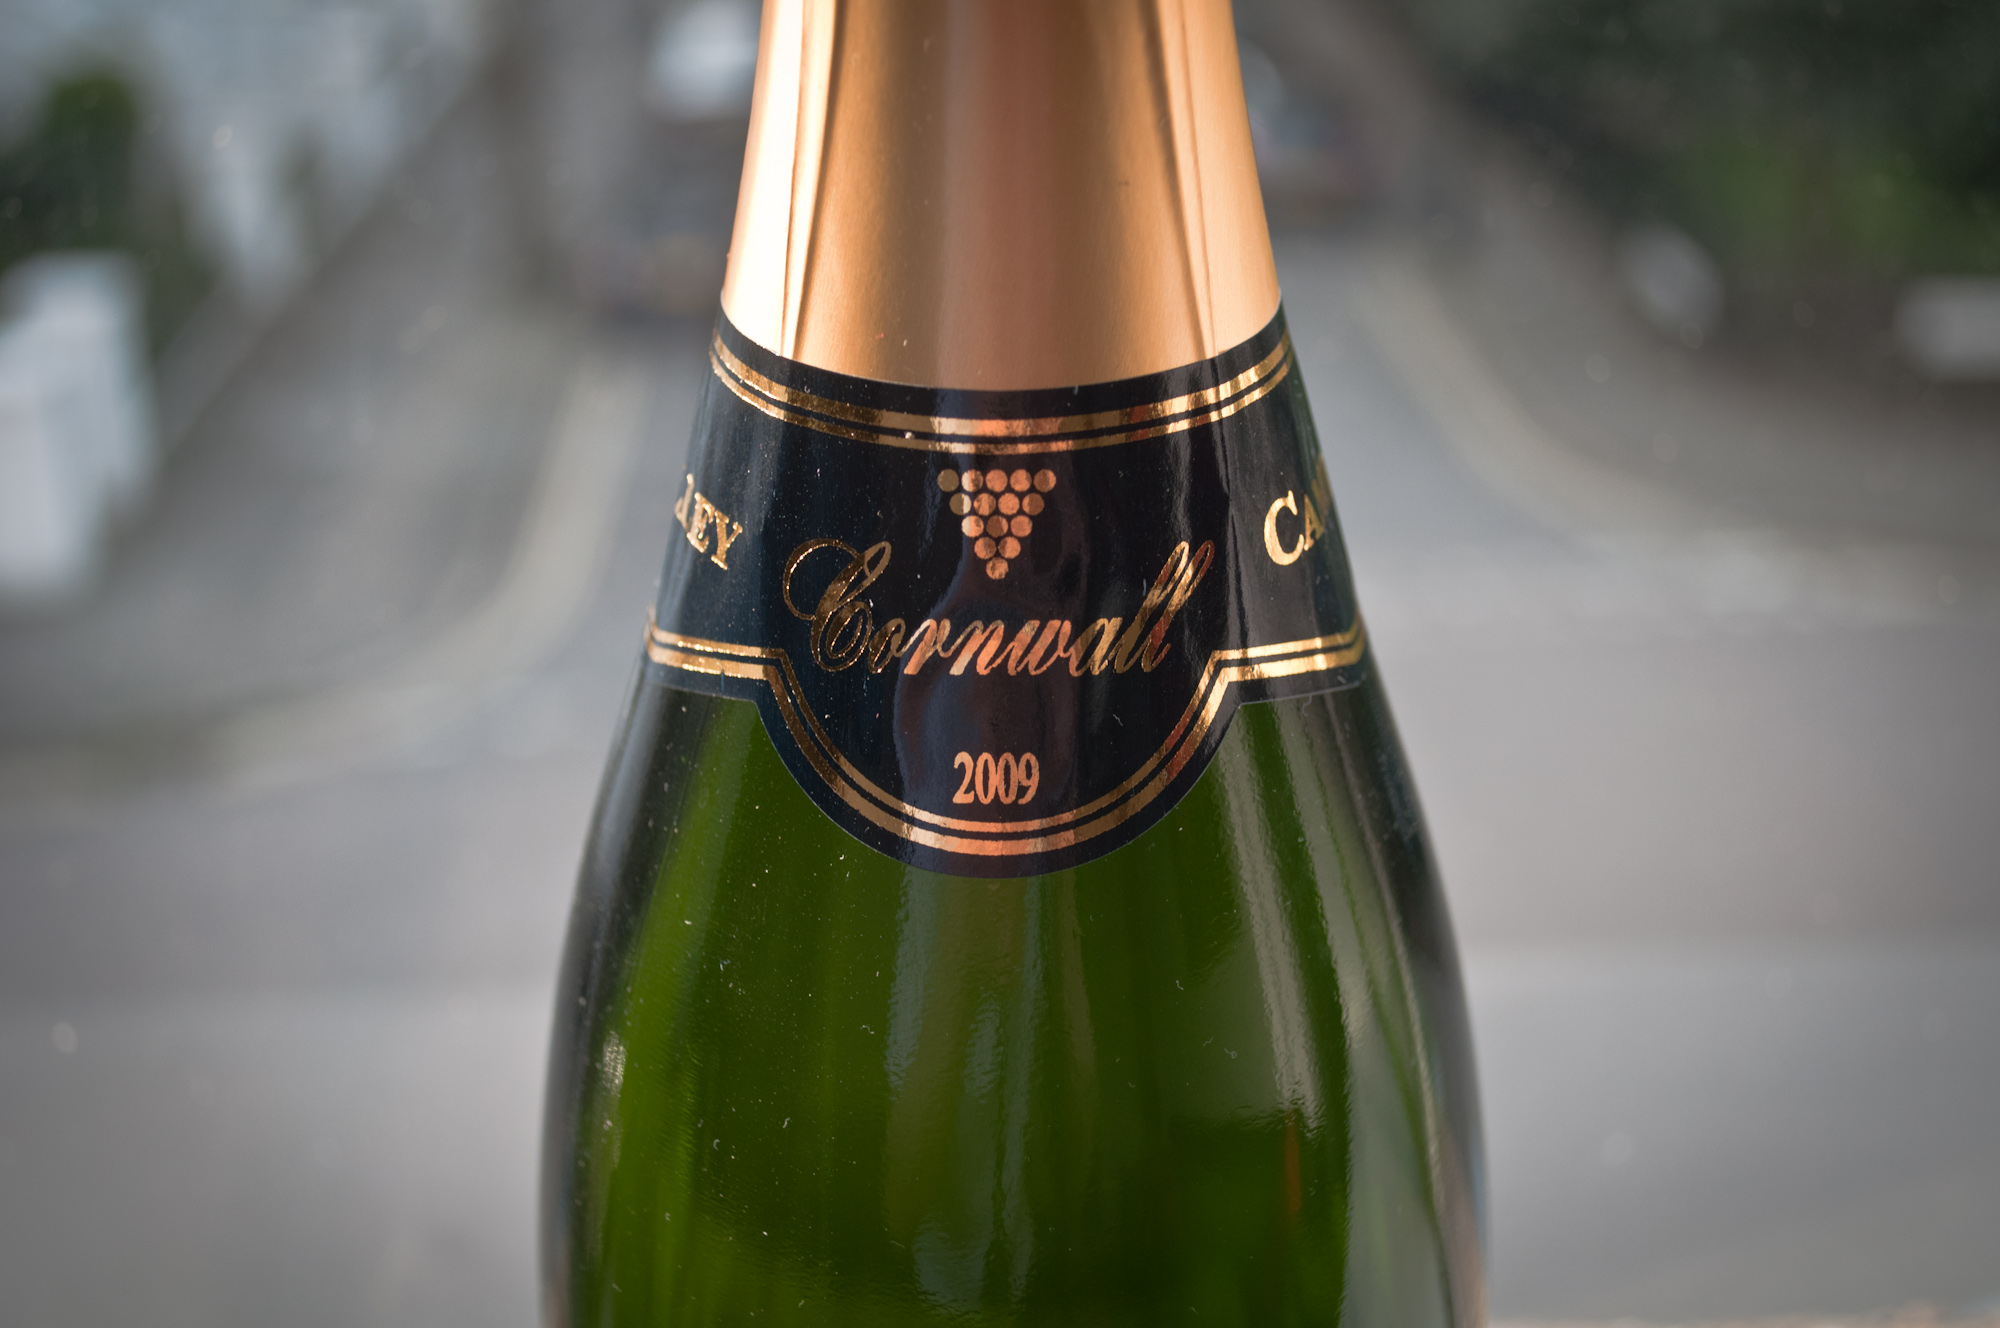 sparkling wine from Cornwall